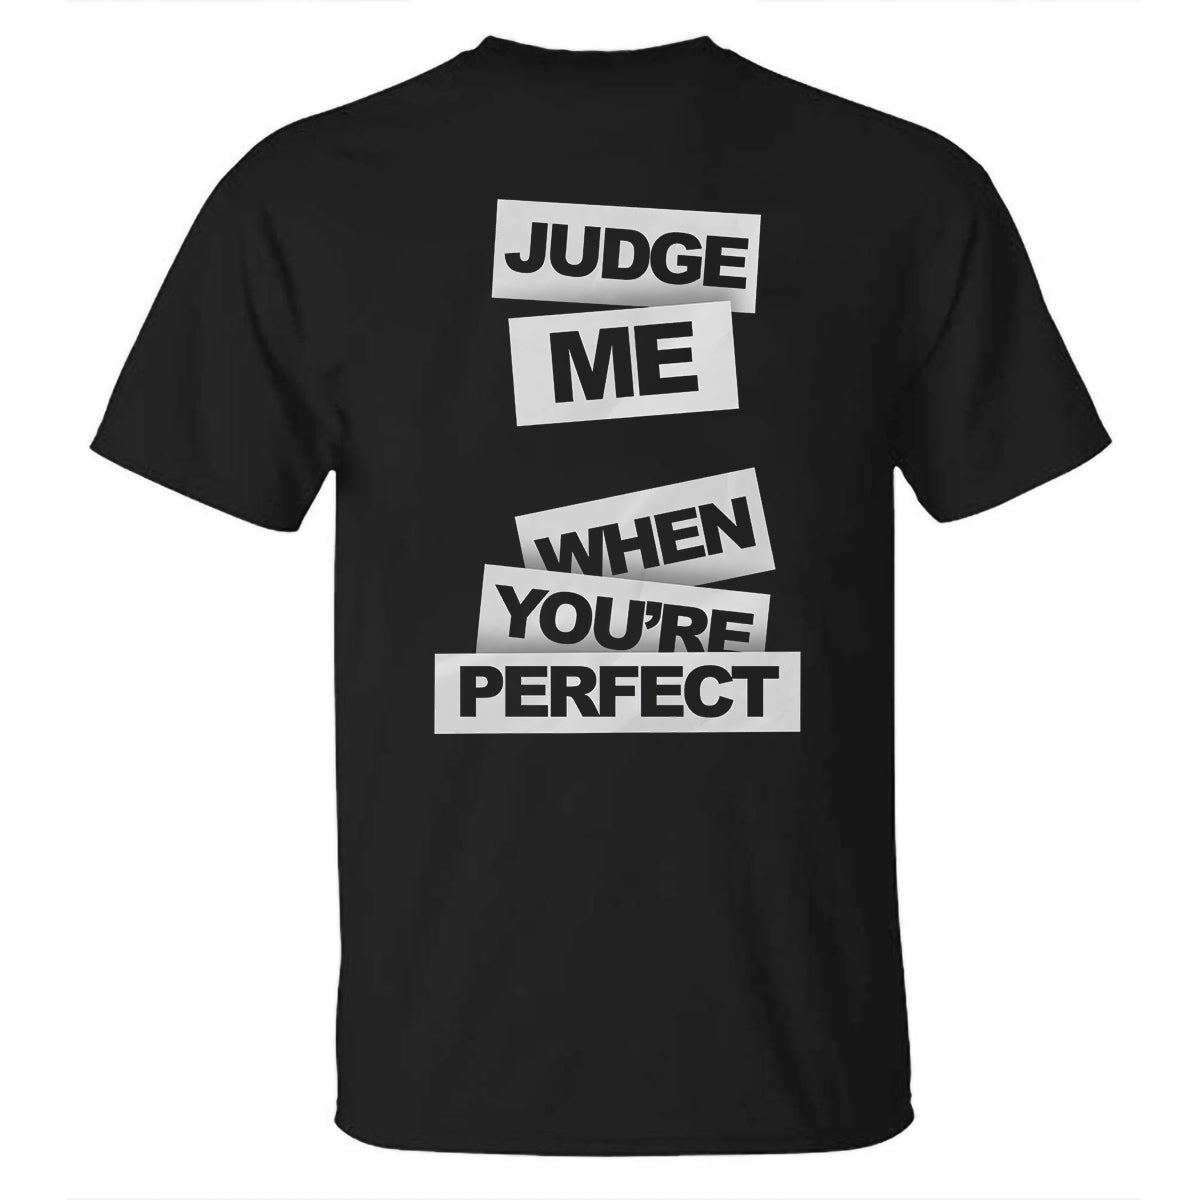 Judge Me When You're Perfect Printed T-shirt